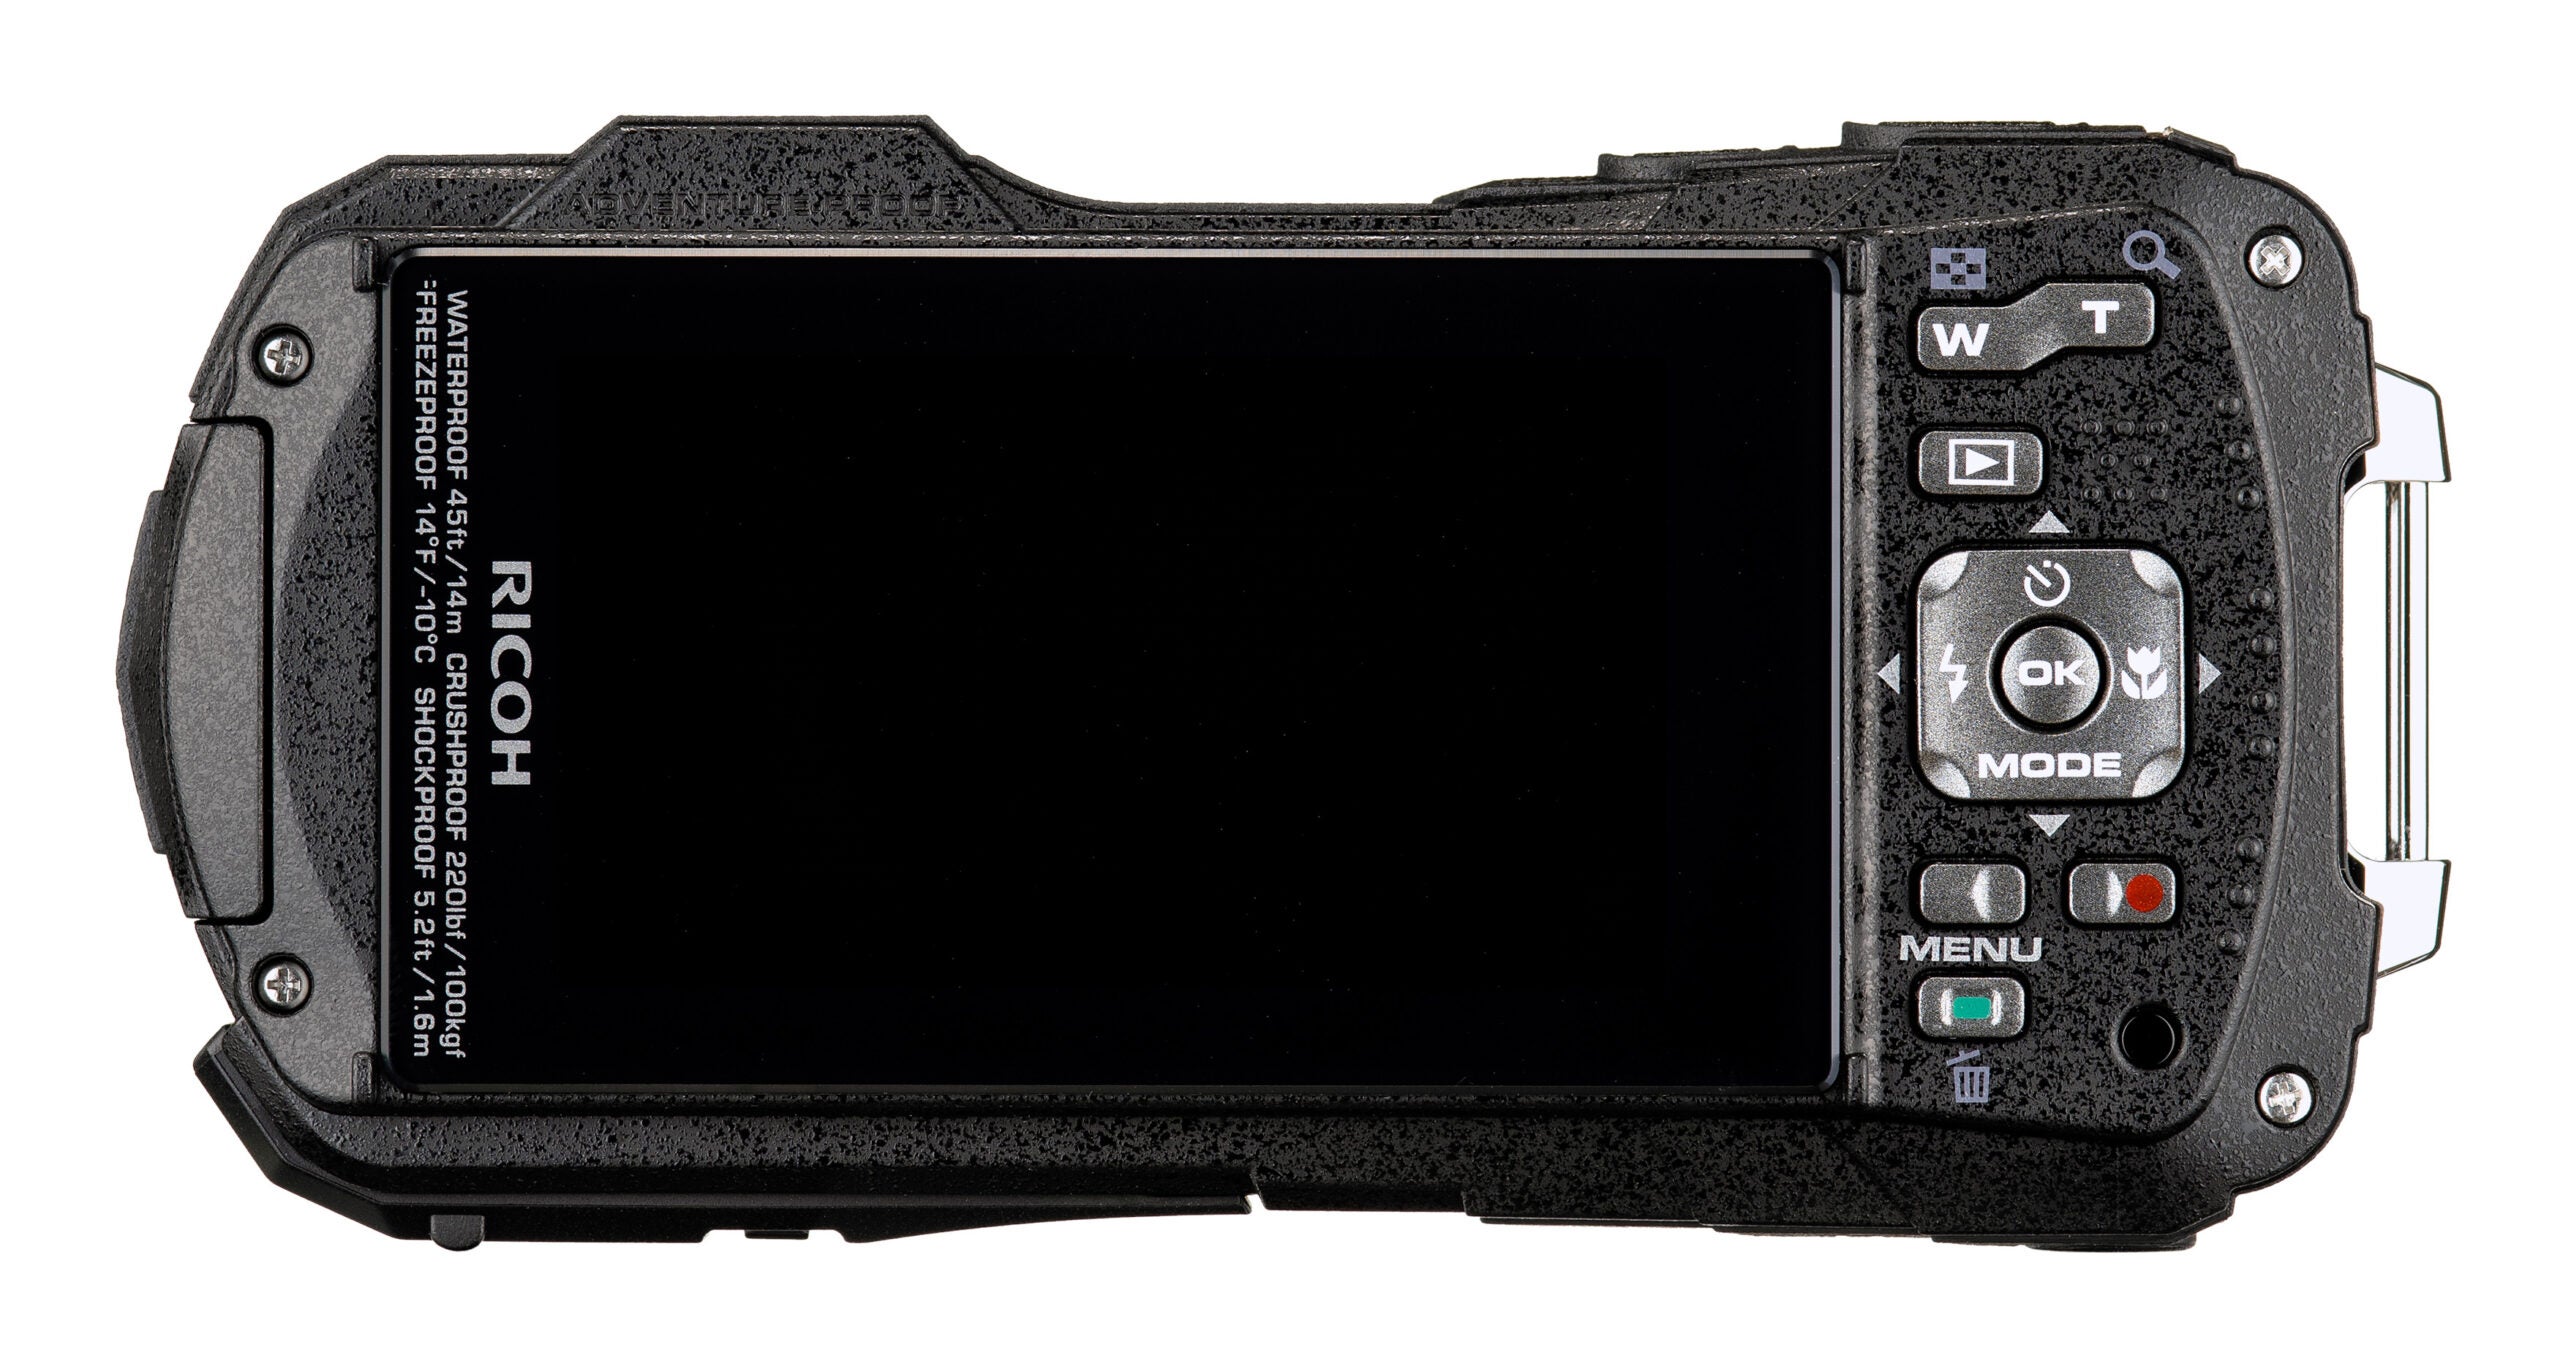 The new Ricoh WG-80